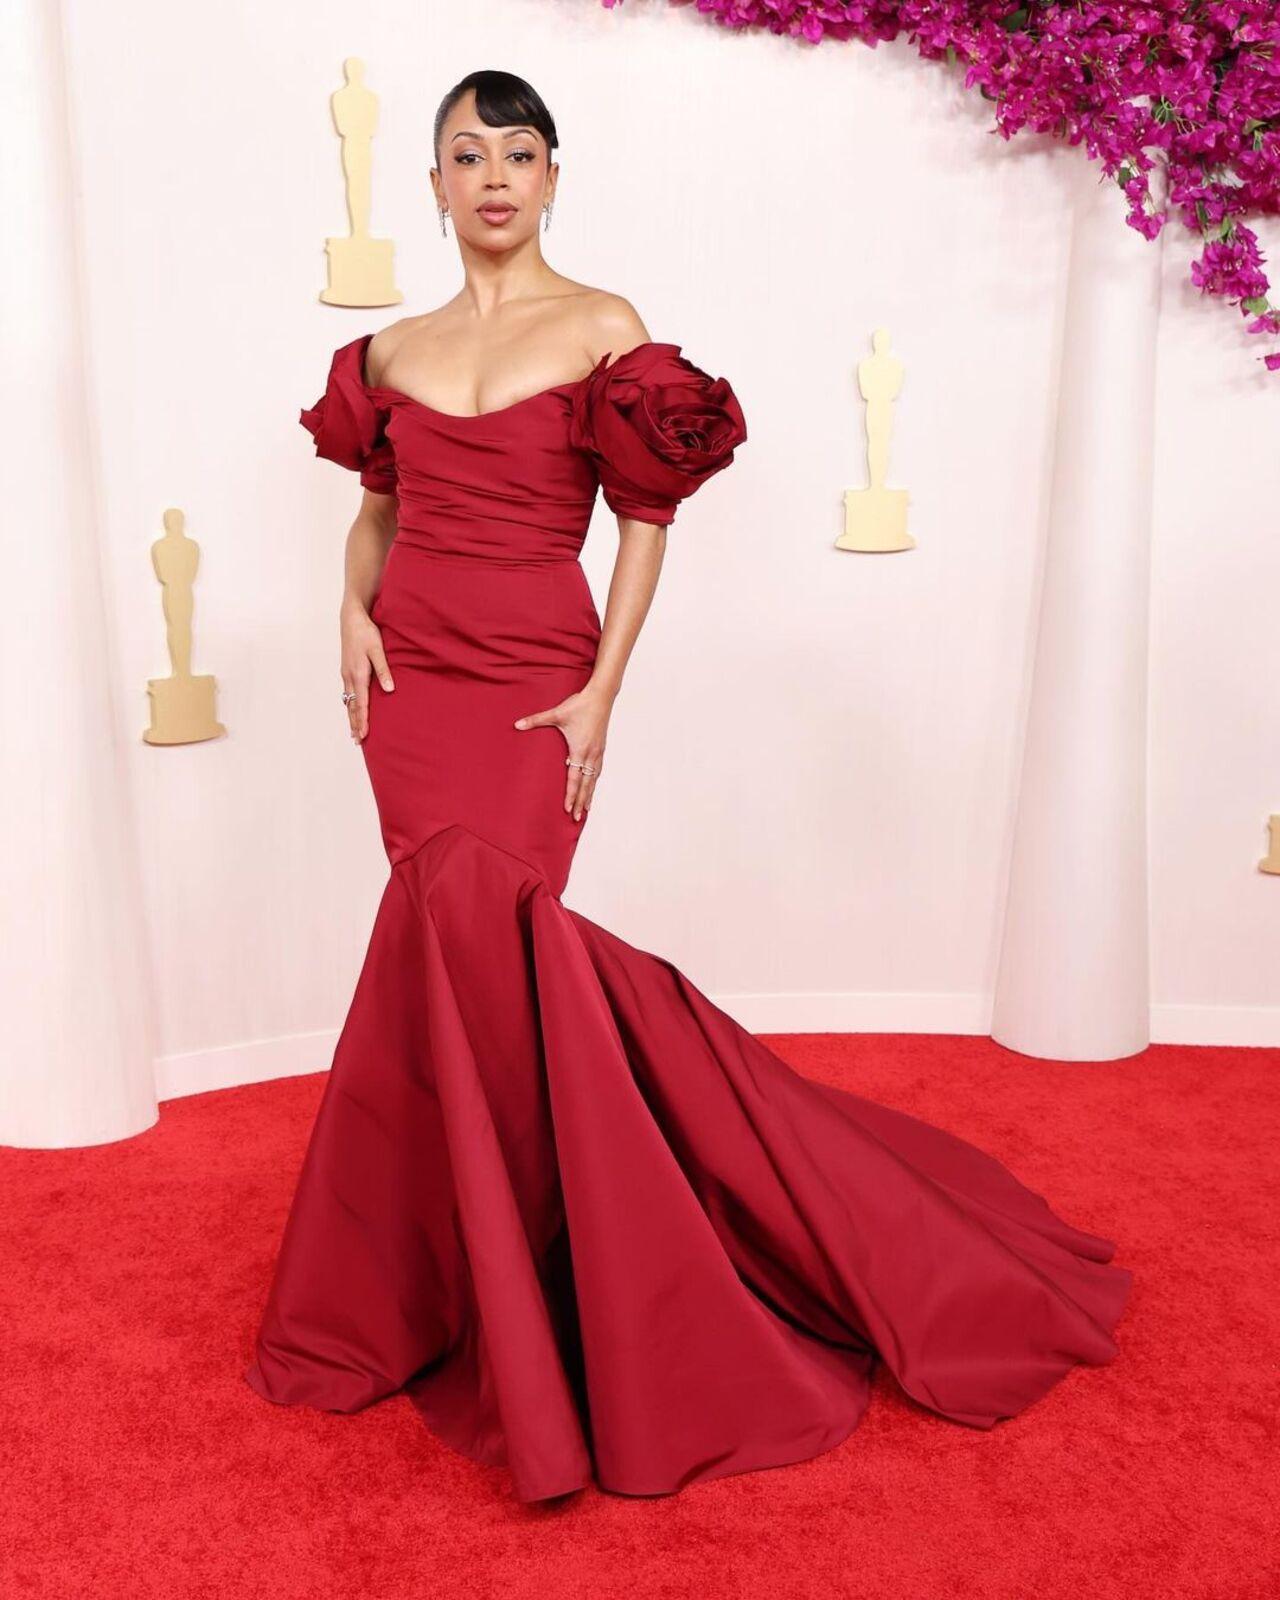 Liza Koshy looked stunning in a red gown for the big night. Born in Texas, Liza is born to American mother and Indian Malyali father